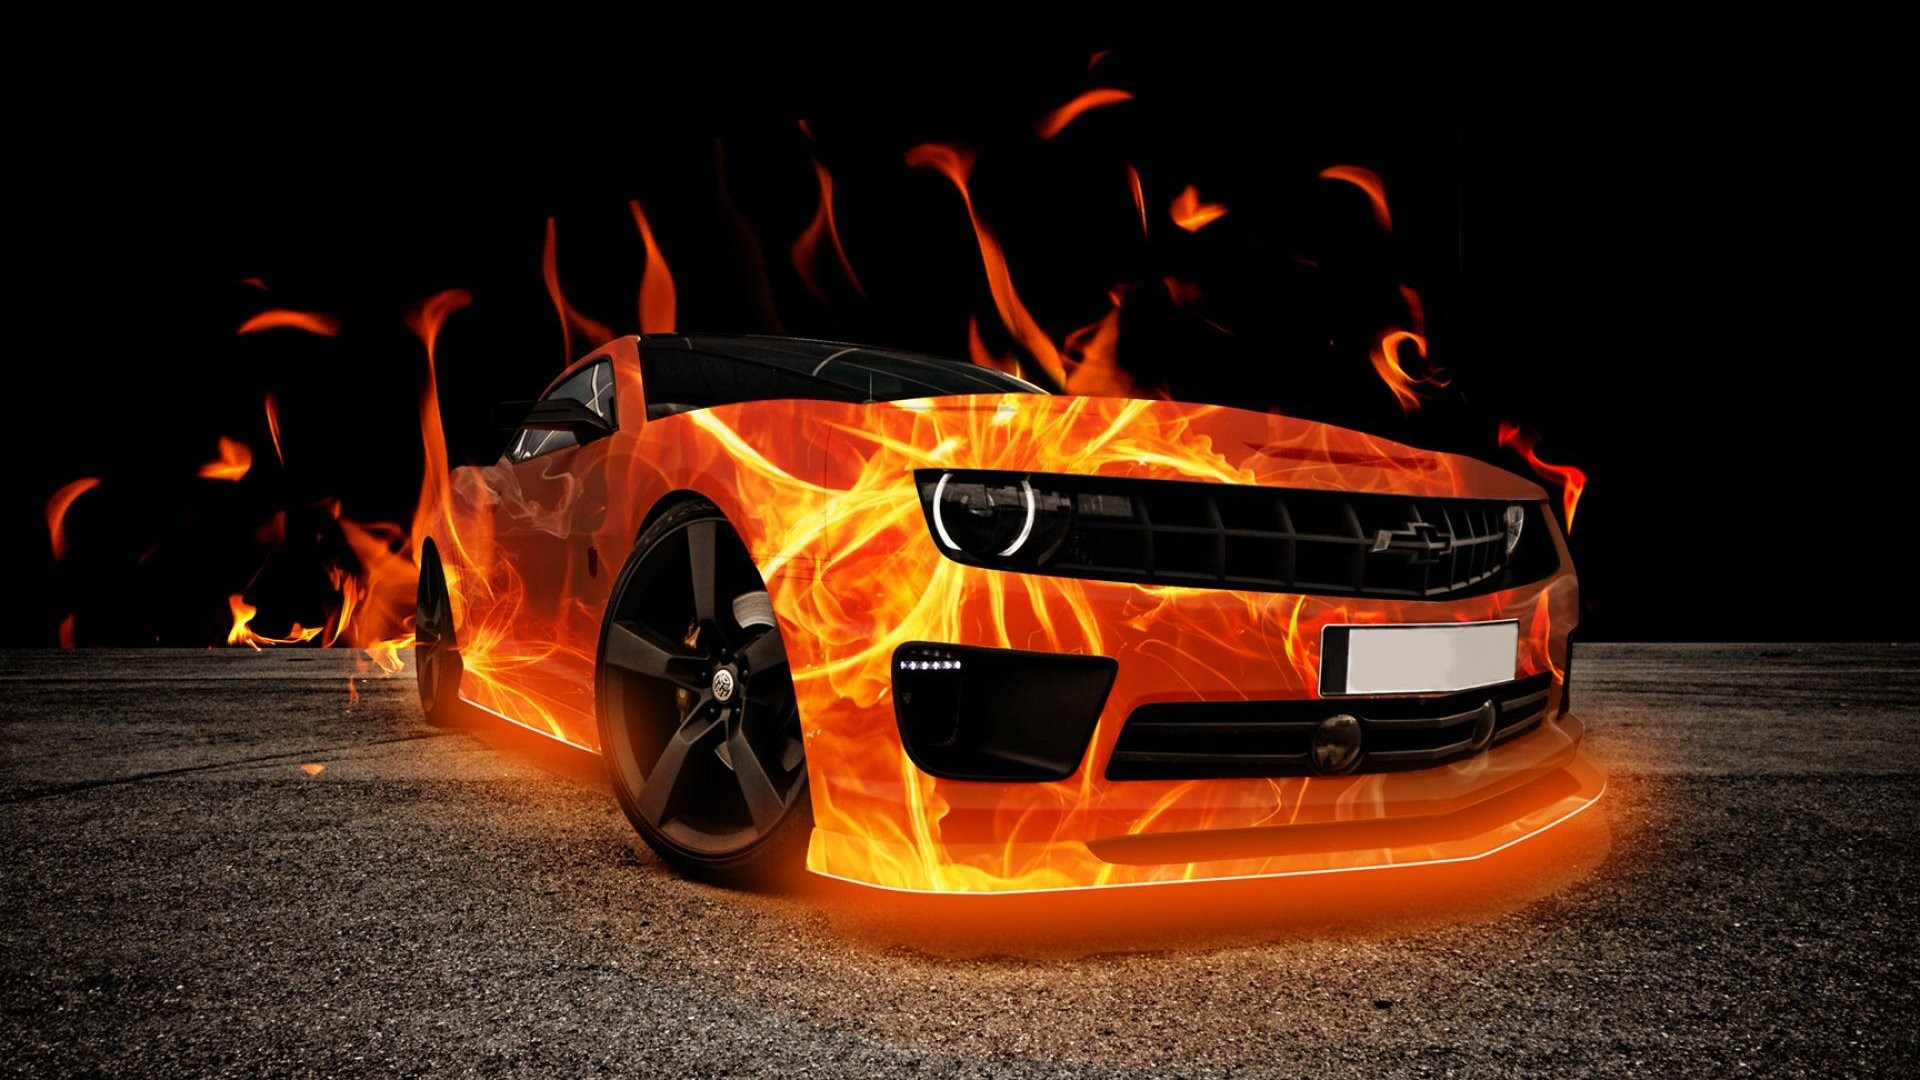 1920x1080 Permalink to Cool Backgrounds Hd 3d Car